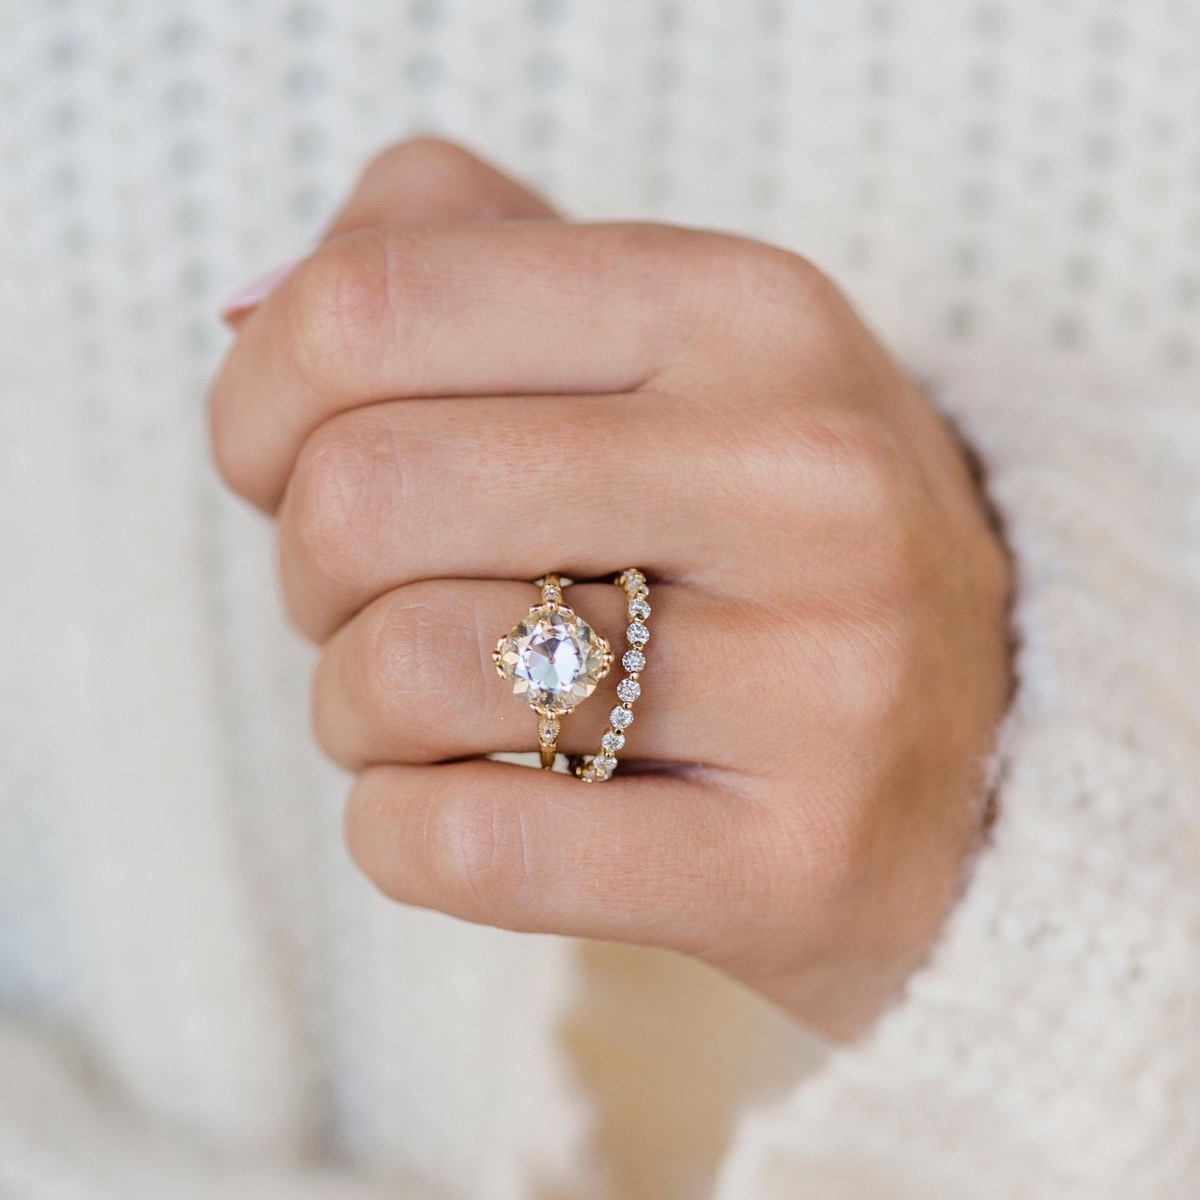 Woman's hand with vintage e-ring and band